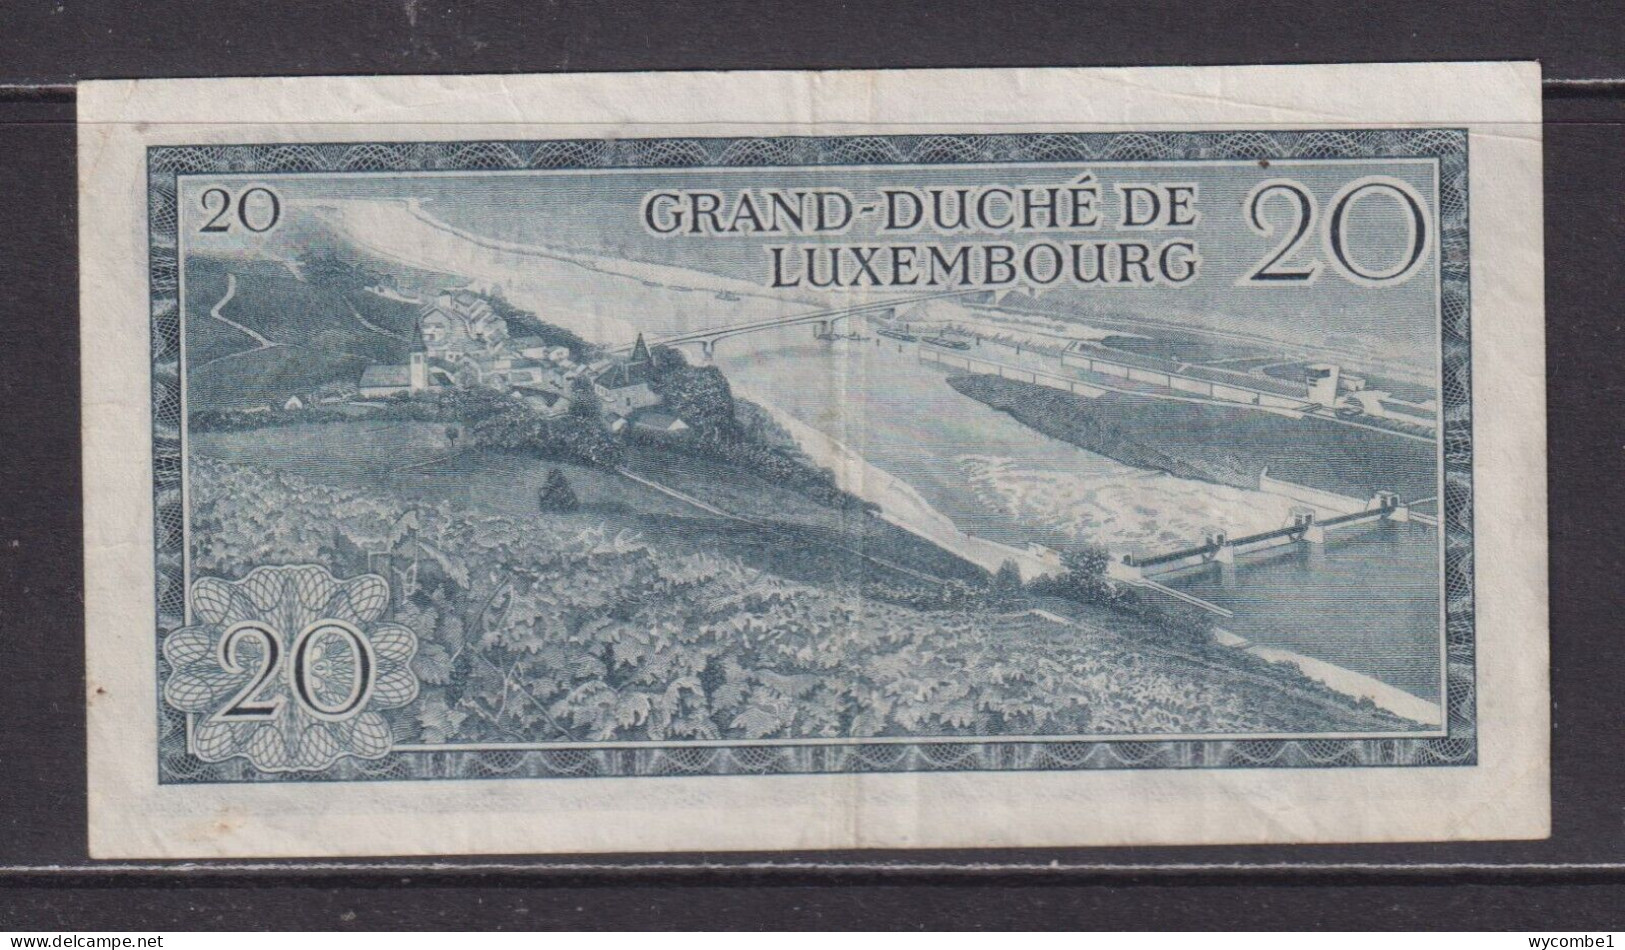 LUXEMBOURG - 1966 20 Francs Circulated Banknote - Luxemburg